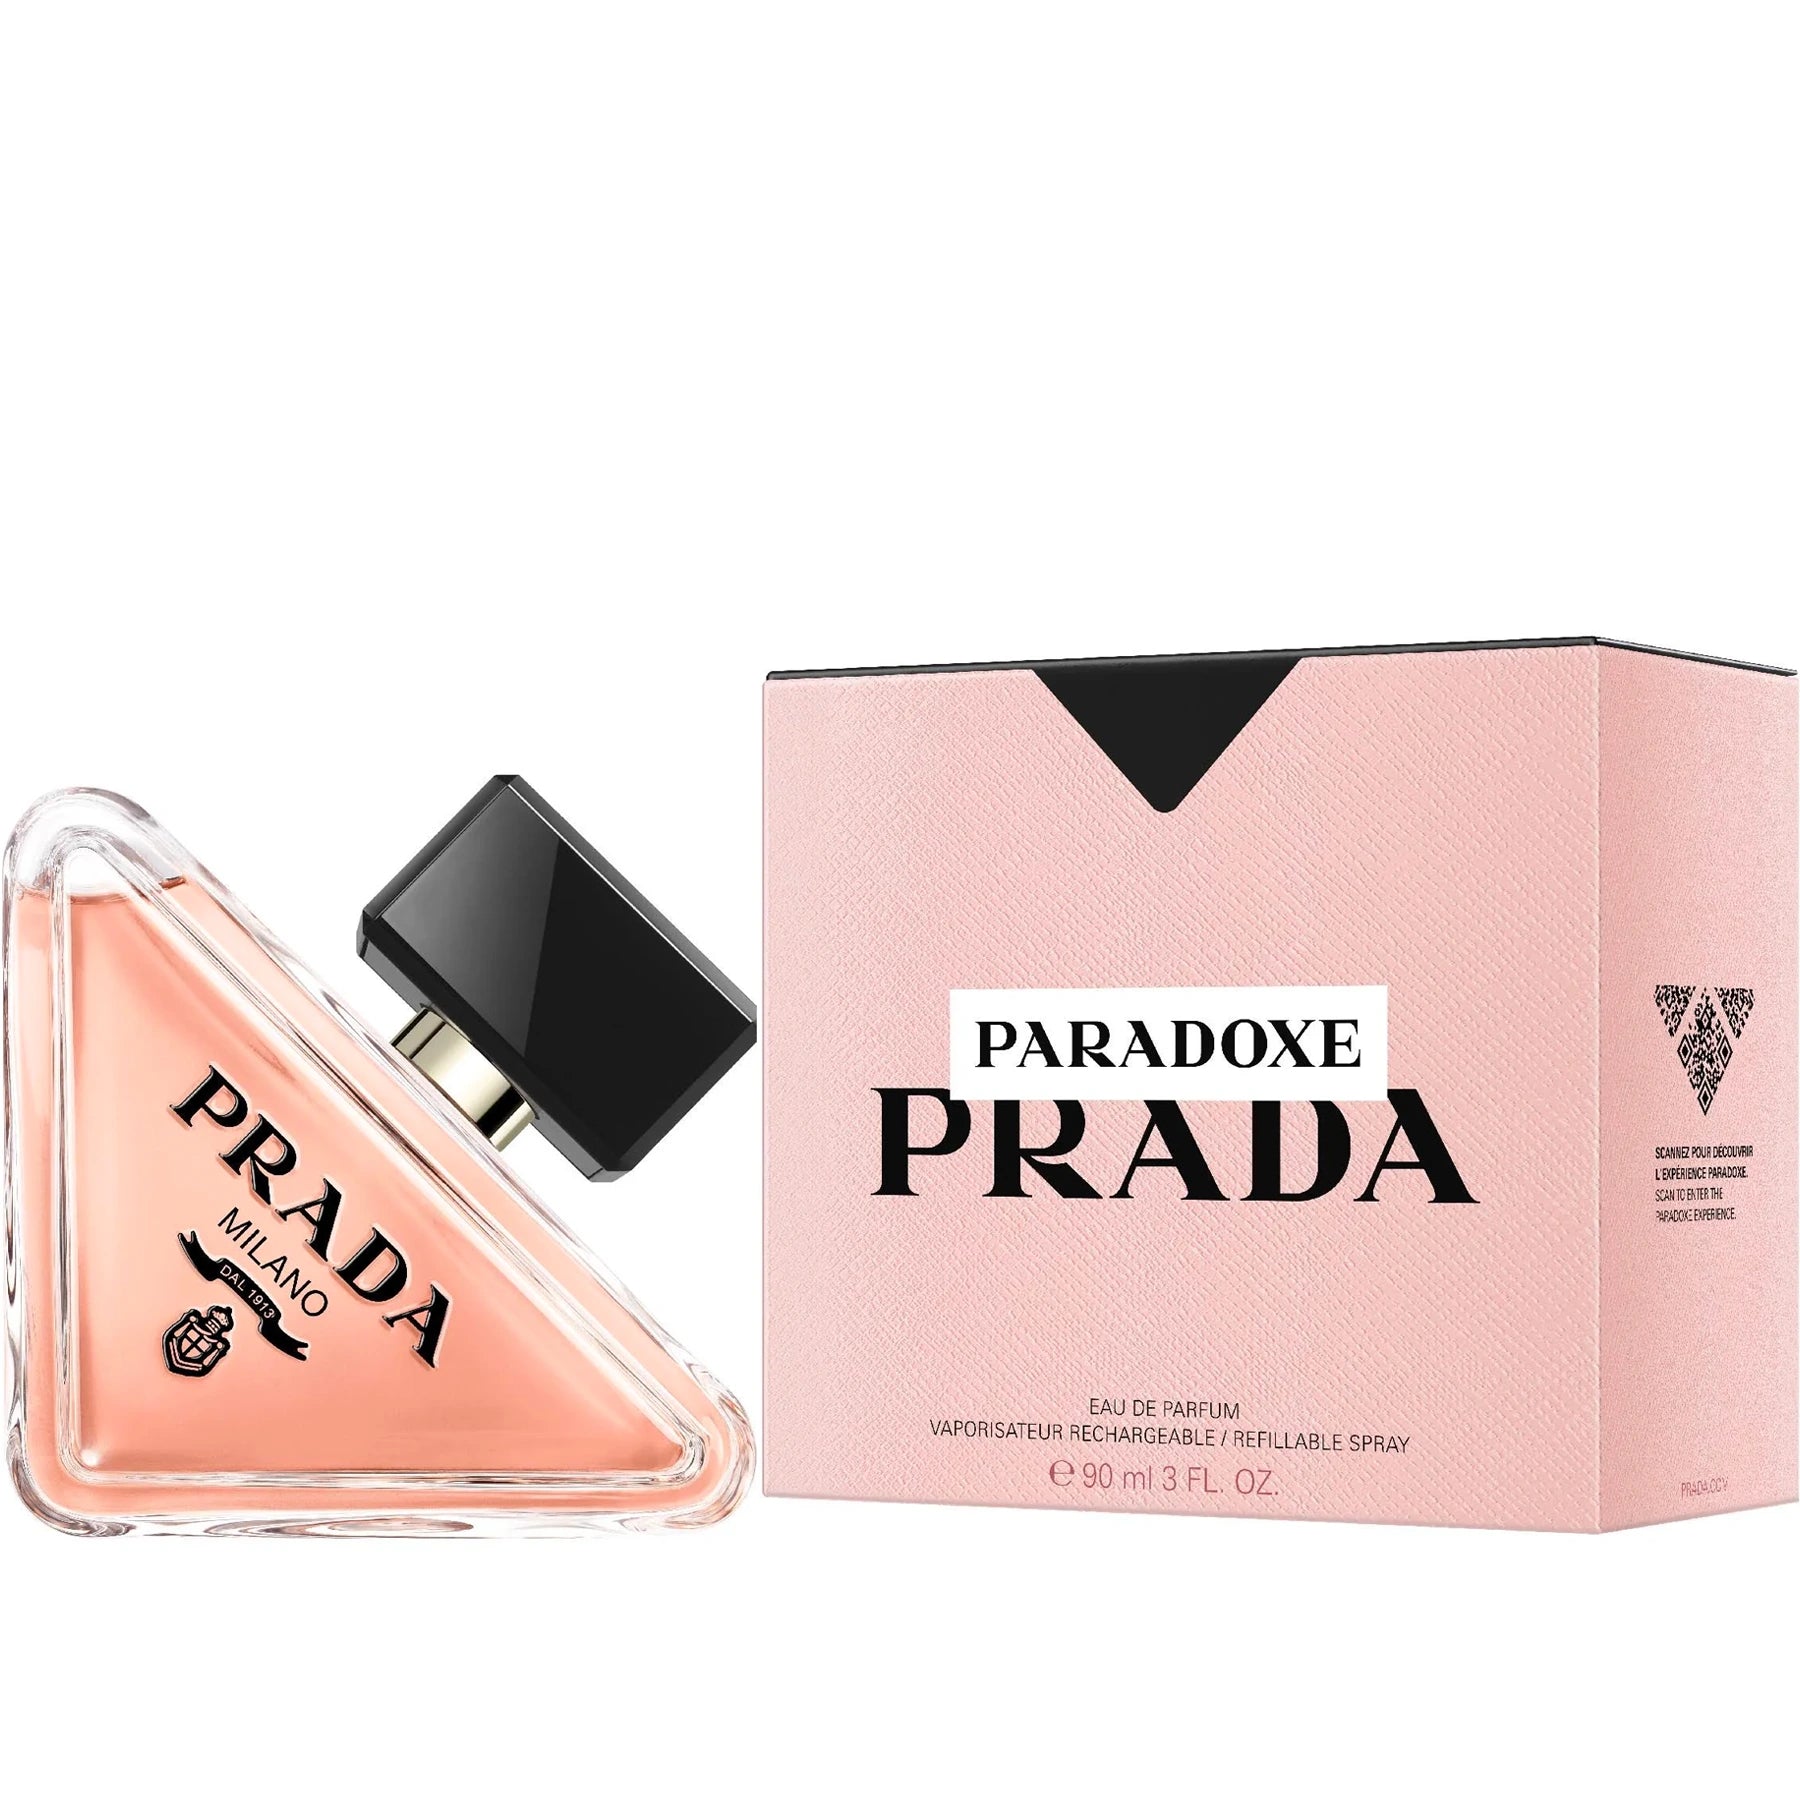 <p>Experience the luxury of Prada Paradoxe 3.0 oz EDP for Women, a floral ambery fragrance that embraces the paradoxes of iconic ingredients. Capturing the freshness of the first Neroli bud extraction for Prada, Ambrofix™ adds a vibrant warmth, while the intense yet subtle and comfortable Serenolide™ trail creates an unforgettable scent. Top notes of Calabrian Bergamot, Tangerine, and Pear keep it light, while the heart of Neroli Essence, Neroli Bud Essence, and Tunisian Orange Flower ensures a lasting impression.</p>
<ul class="" data-mce-fragment="1"></ul>